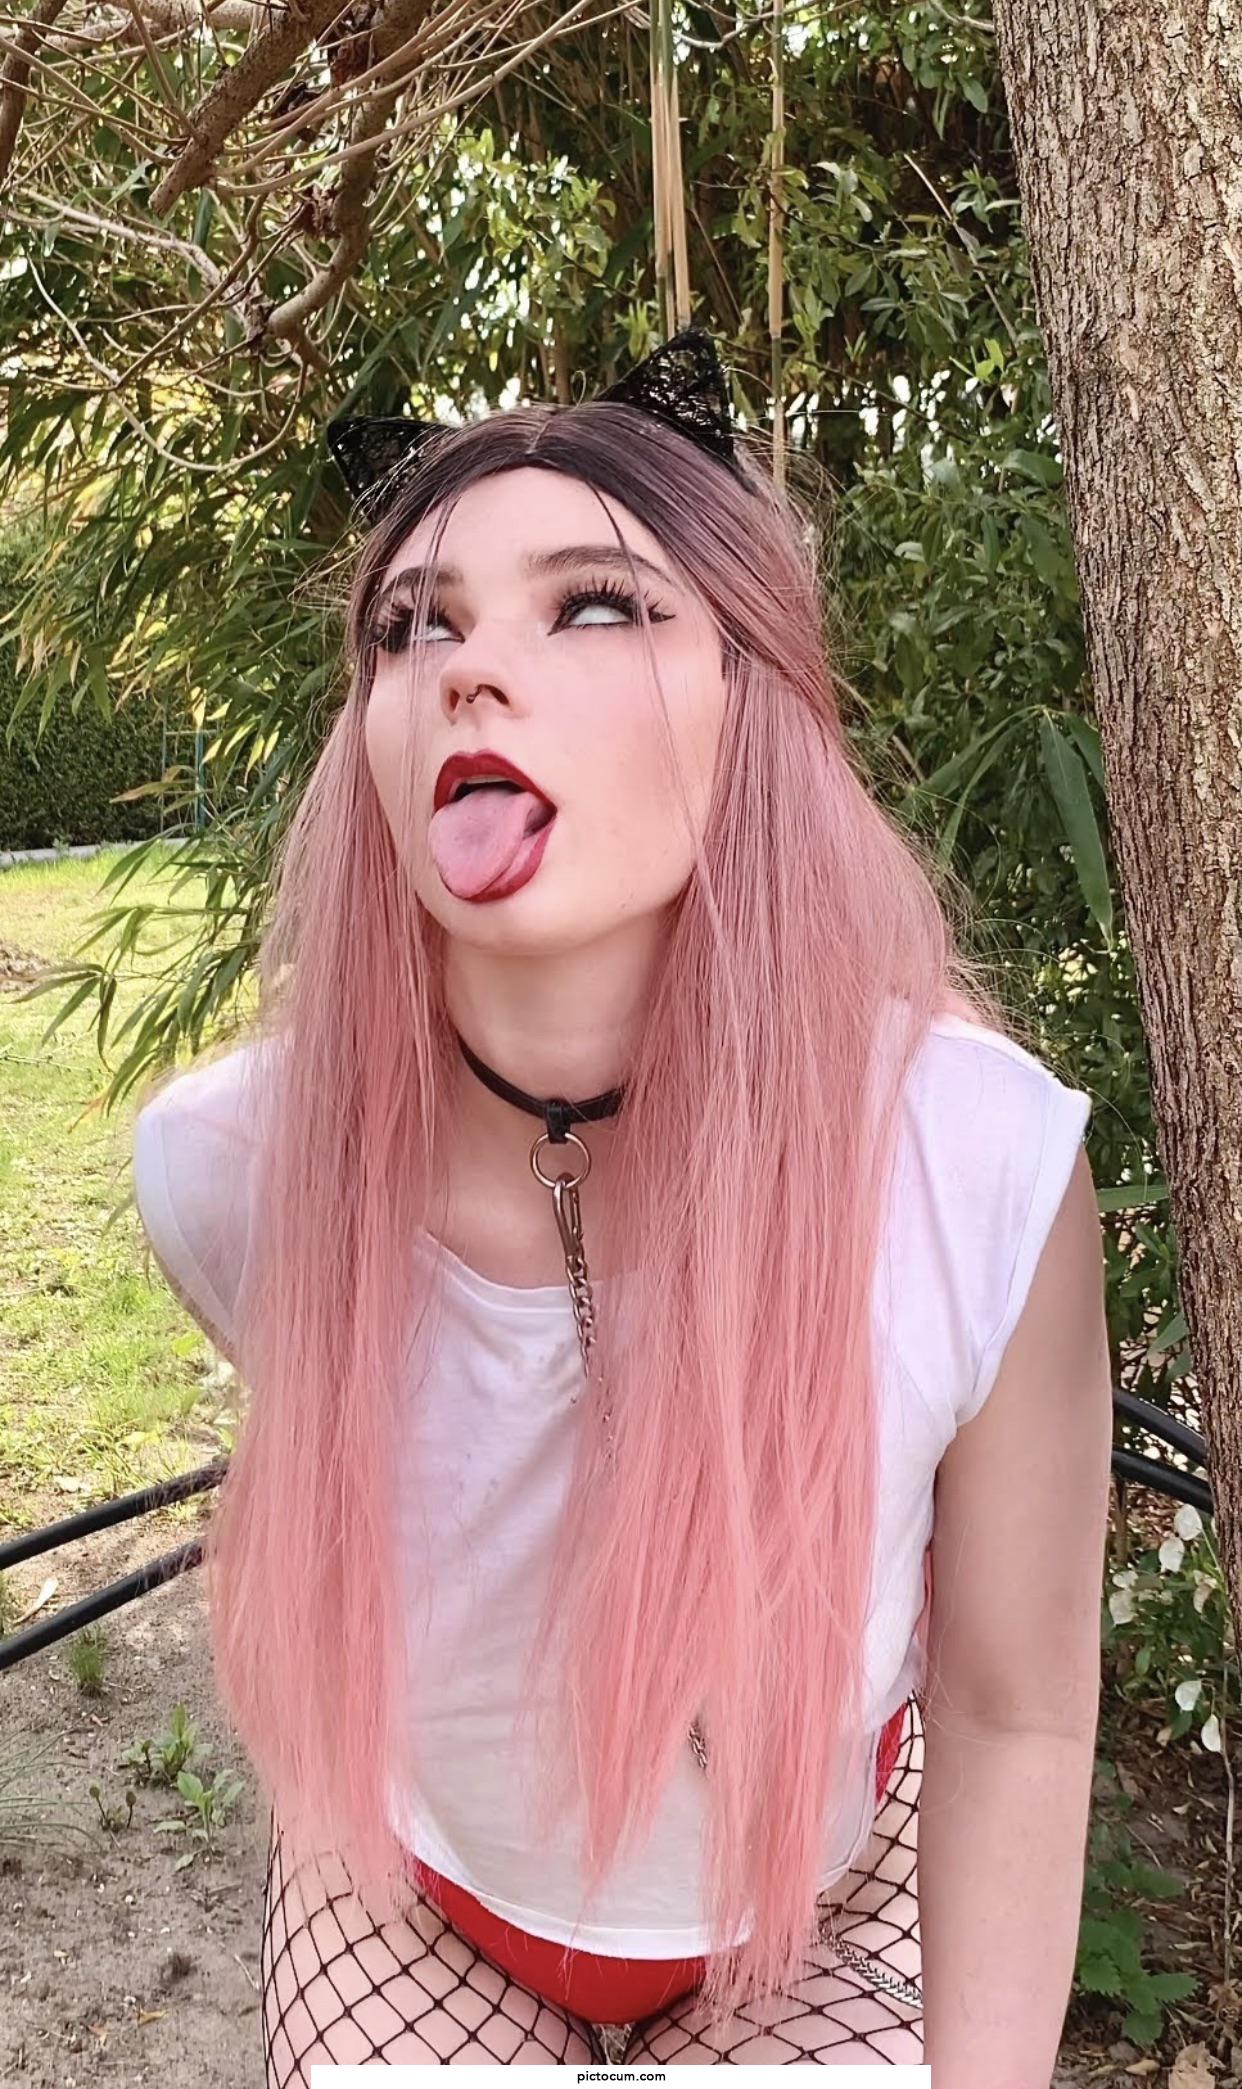 Take me to the park and we could cum together 🤤😜